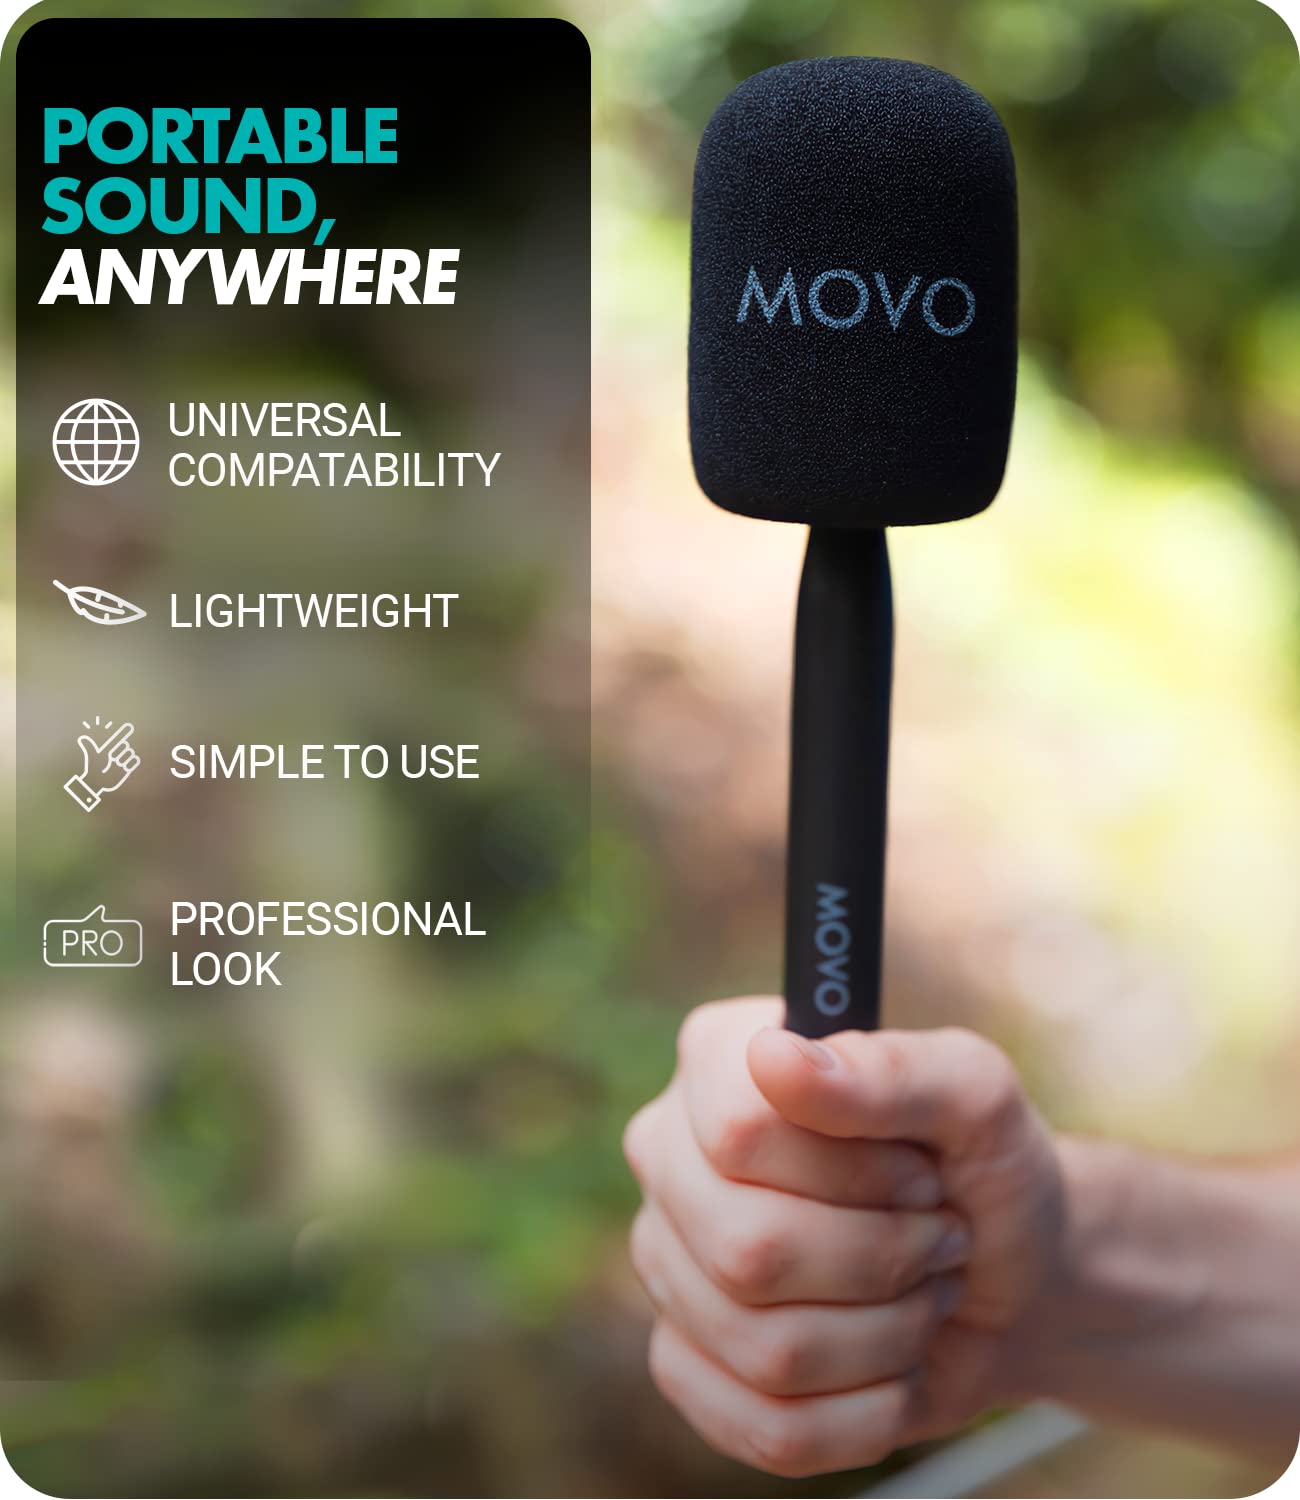 Movo WMX-HM Wireless Interview Microphone Adapter - Compatible with DJI Mic, Rode Wireless GO, Hollyland Lark, and More - Works with Wireless Mini and WMX-2 Systems - Wireless Mic Handle  - Like New